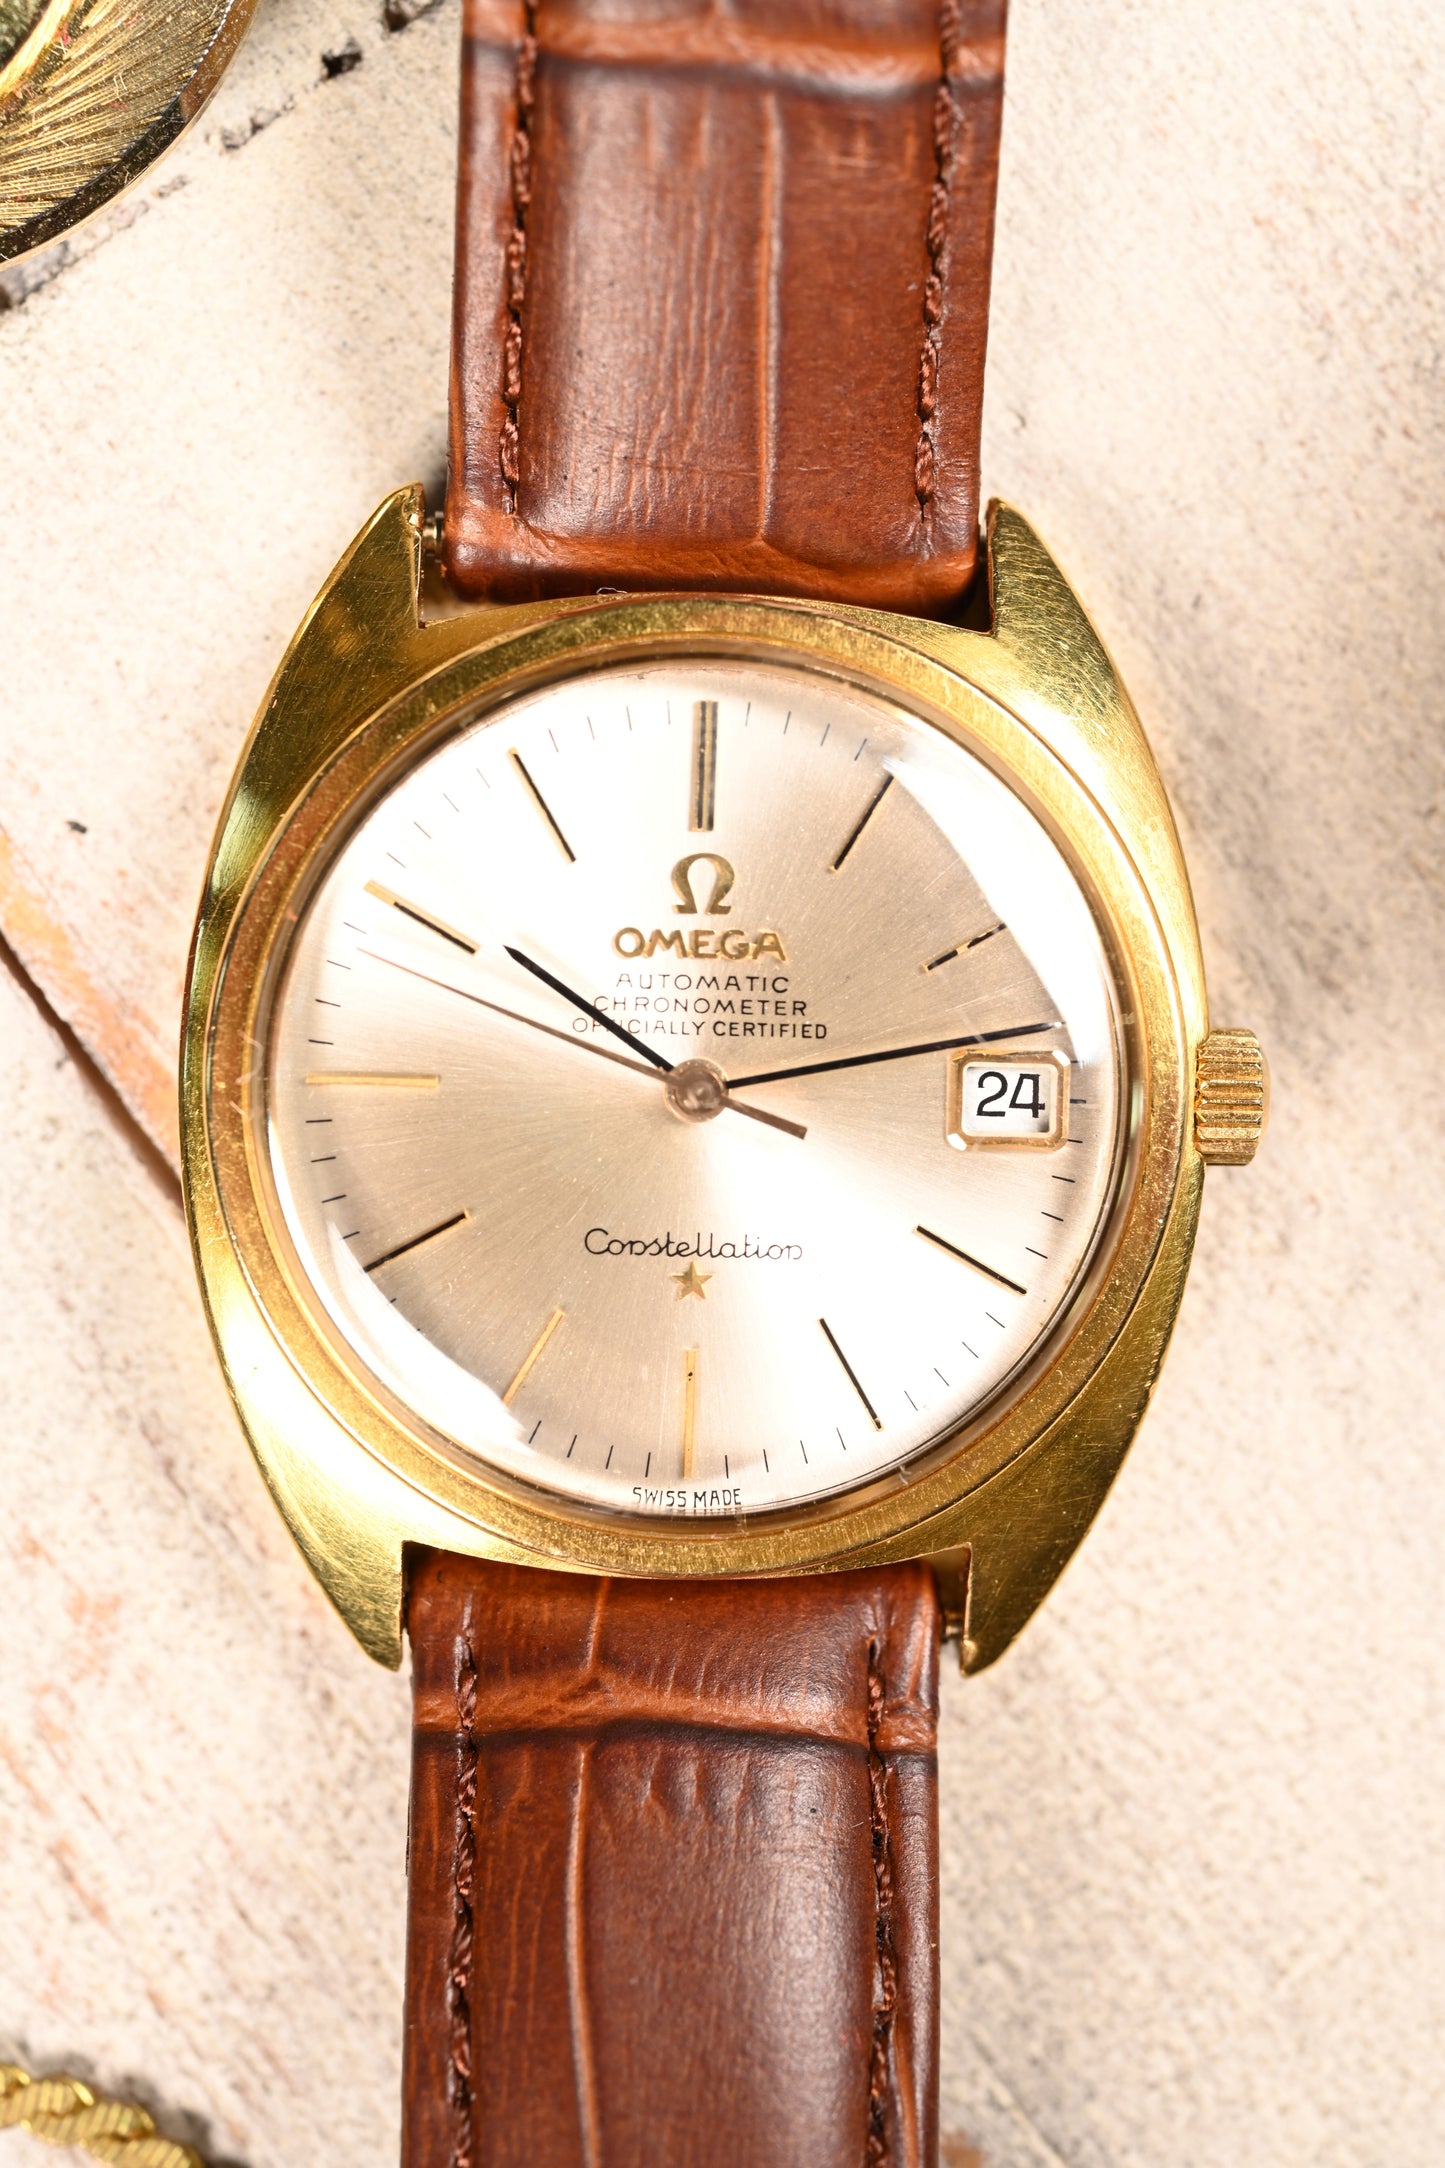 Omega Constellation 168.009 - 18kt yellow gold